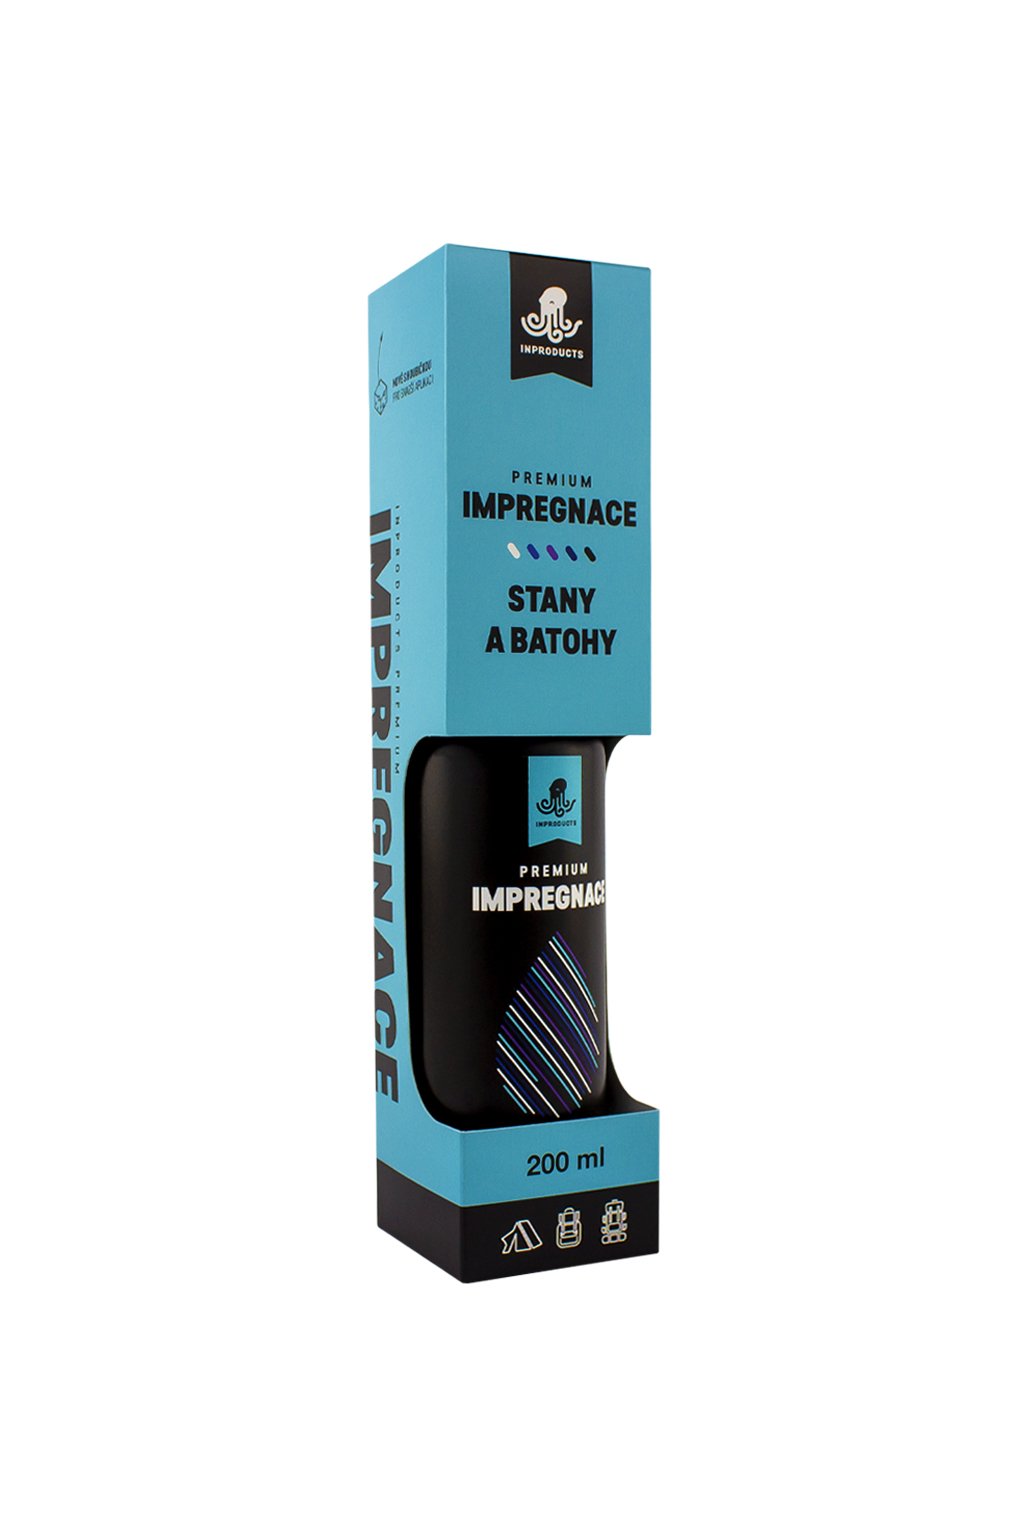 impregnace na stany a batohy - 200 ml - Inproducts